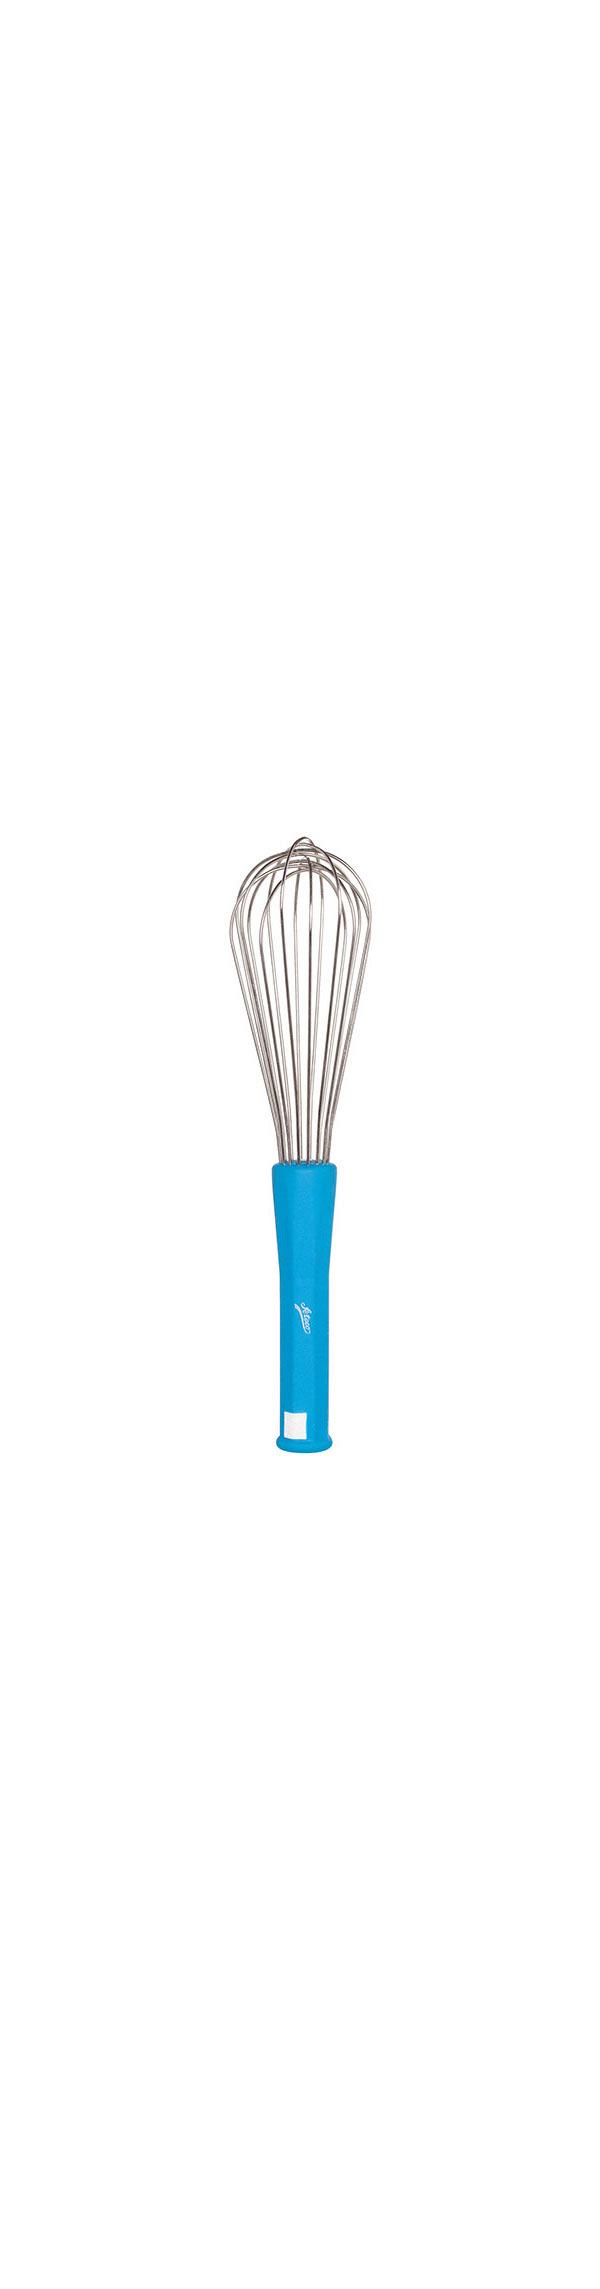 30cm Whisk by Ateco 600